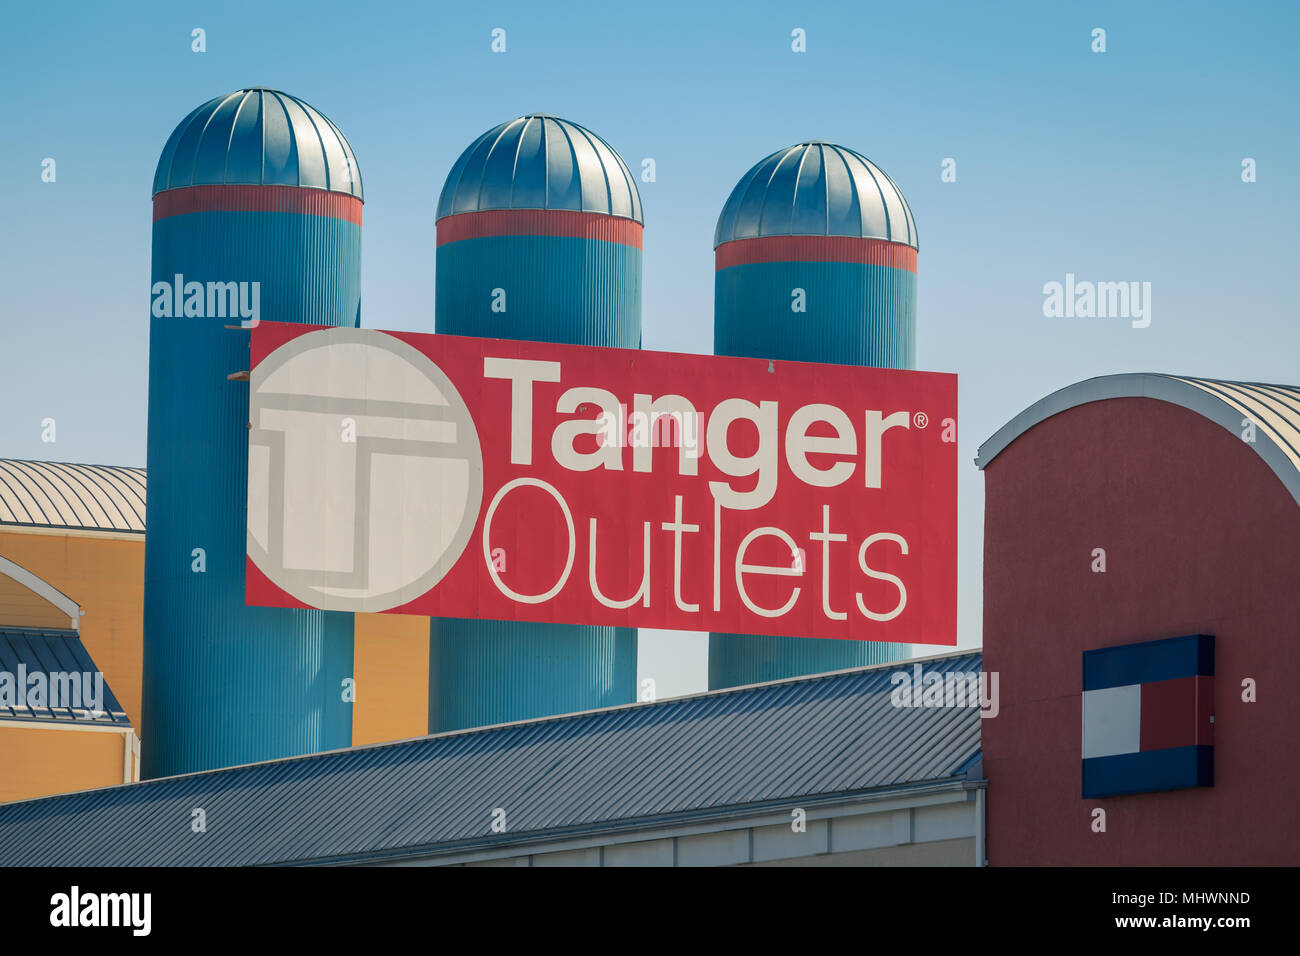 Lancaster, PA, USA - May 2, 2018: The Tanger Outlets sign on three silos. Tanger is a shopping-mall chain featuring brand-name and designer outlet sto Stock Photo